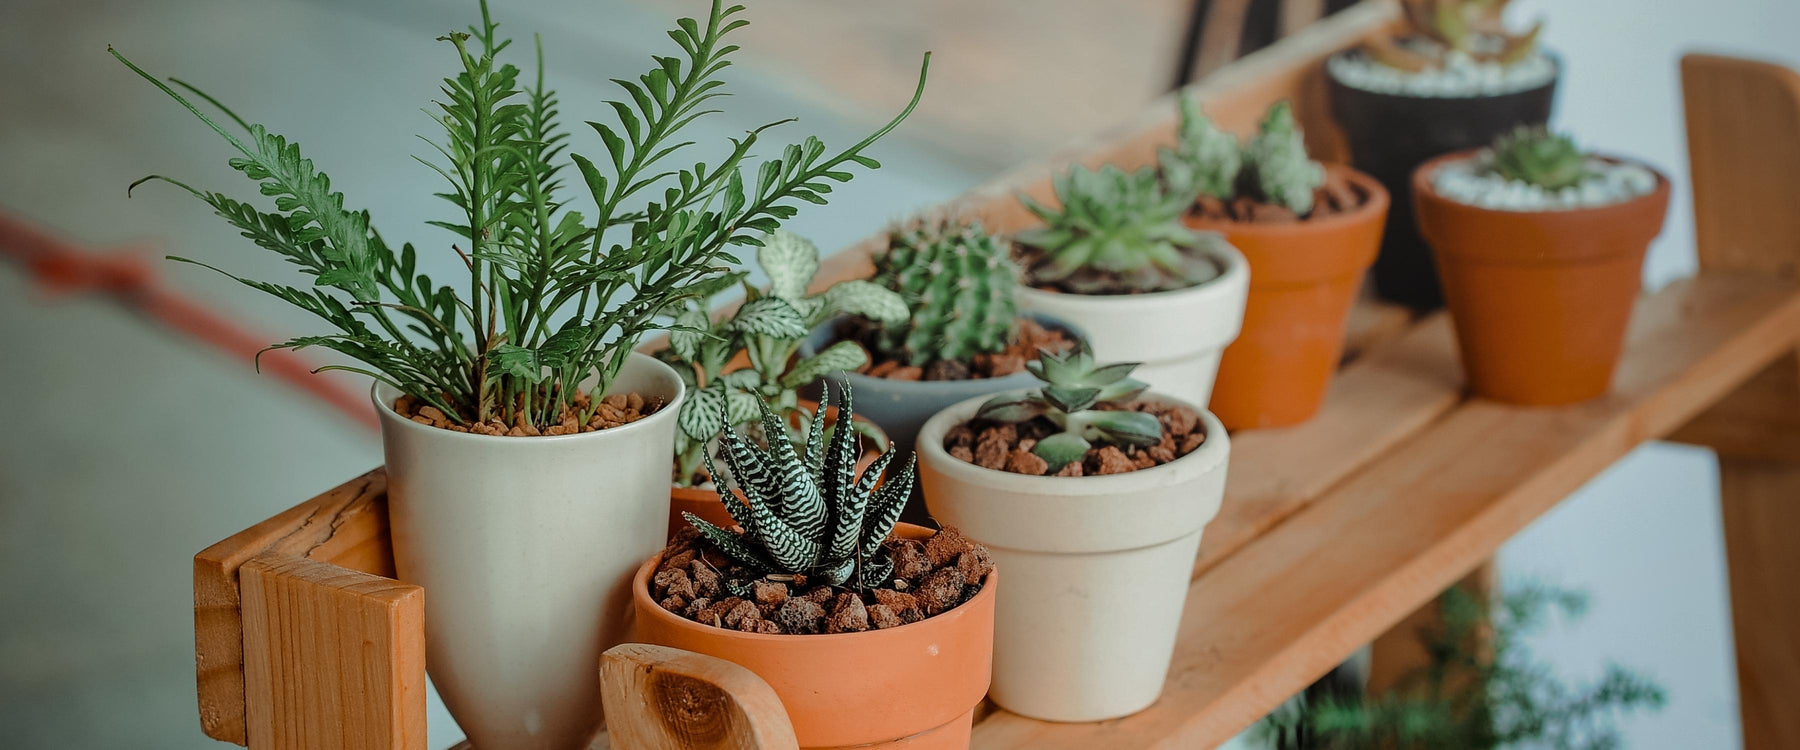 How Should We Take Care of the Plants at Home in the Winter Season?